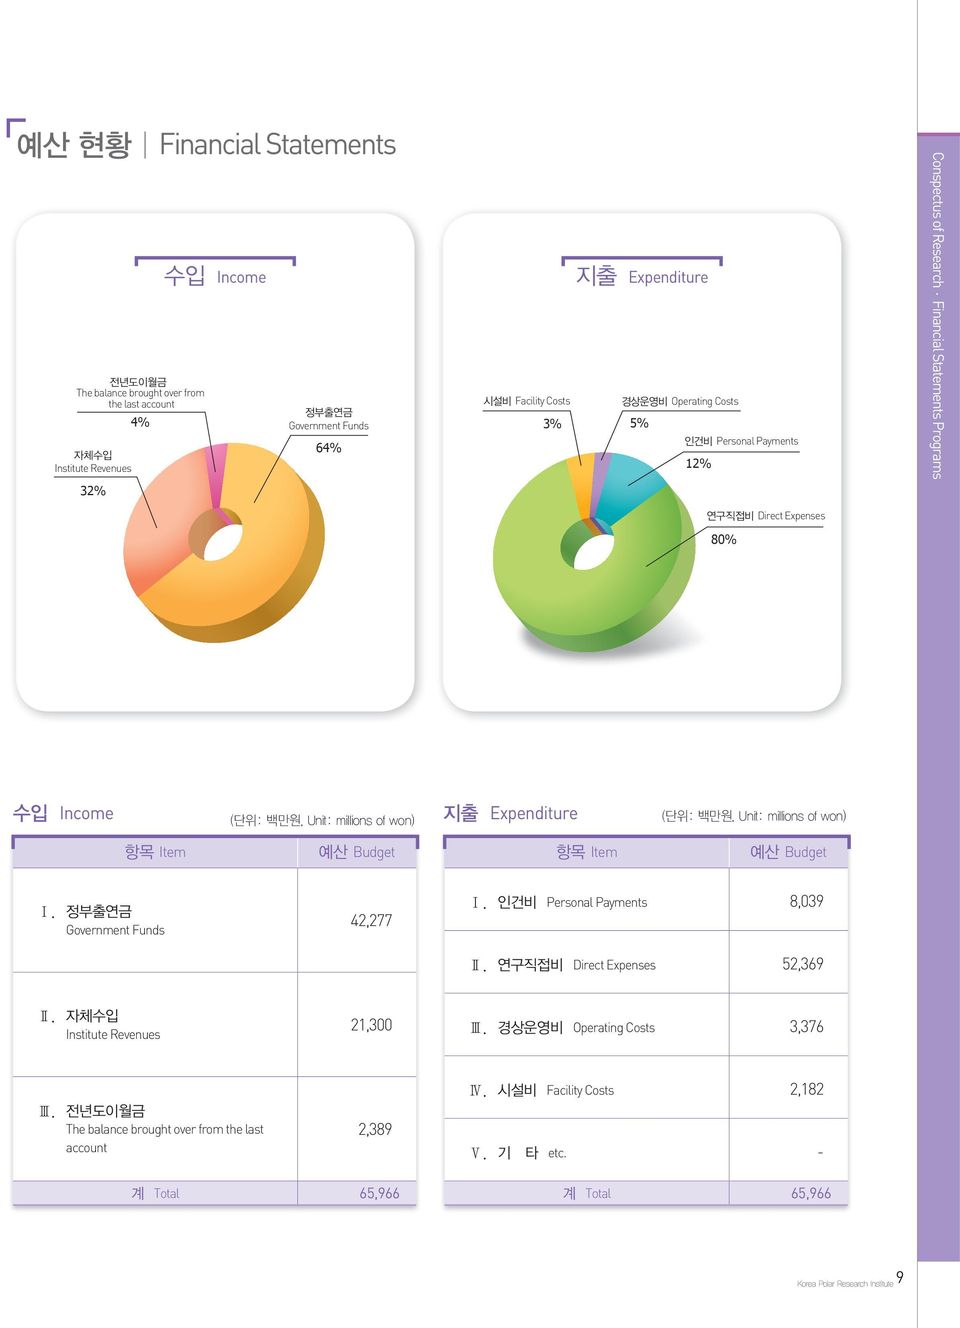 Personal Payments 12% 12% 연구직접비 Direct Expenses 연구직접비 Direct Expenses 80% 80% Conspectus of Research Financial Statements Programs 수입 Income 지출 Expenditure (단위: 백만원, Unit: millions of won) (단위: 백만원,